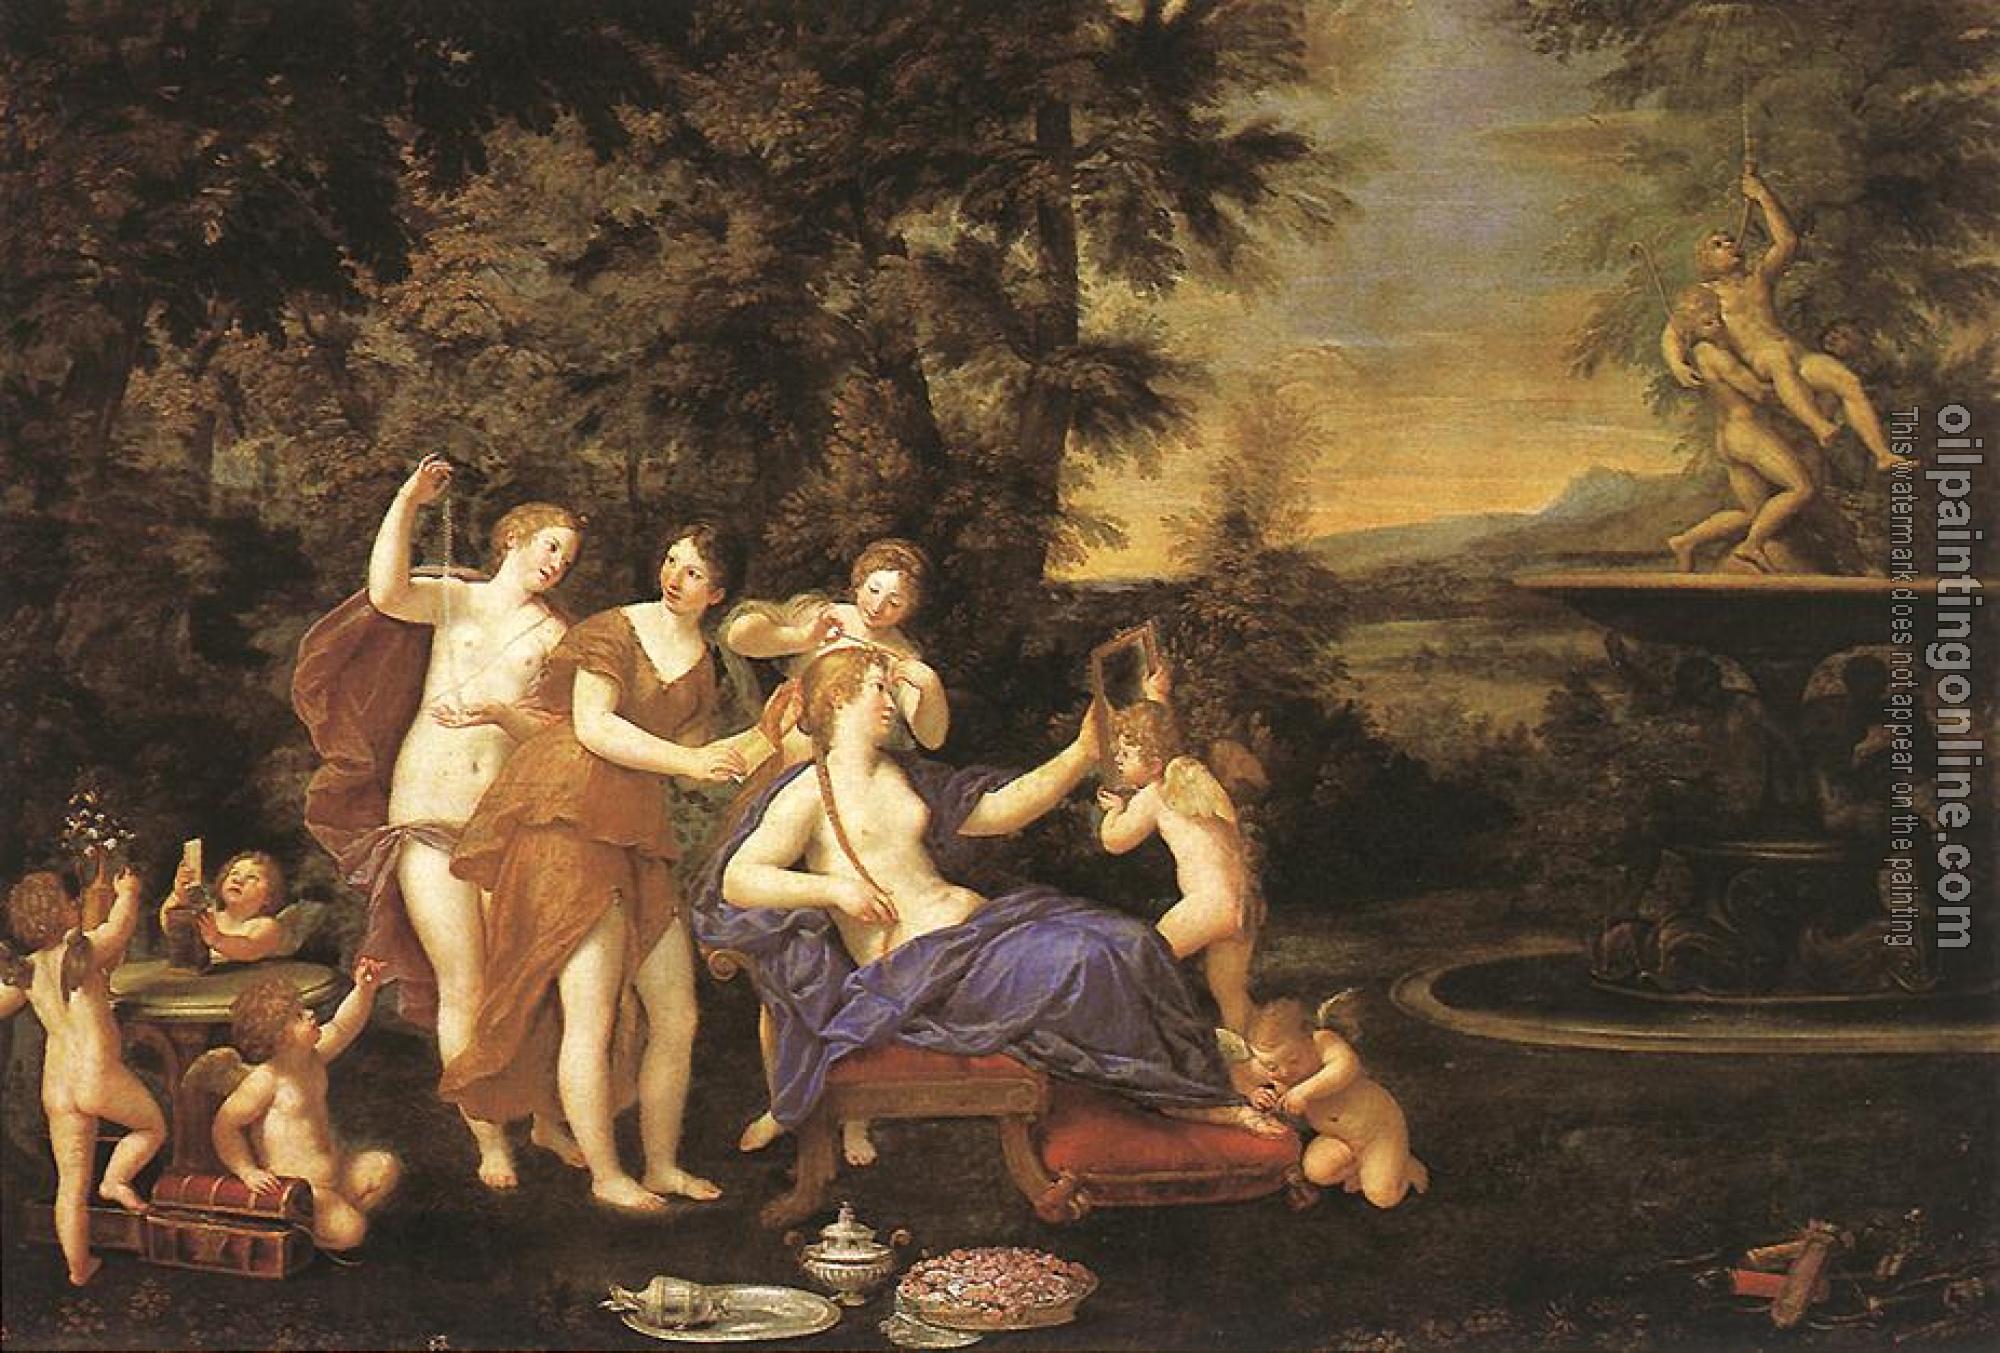 Albani, Francesco - Venus Attended by Nymphs and Cupids